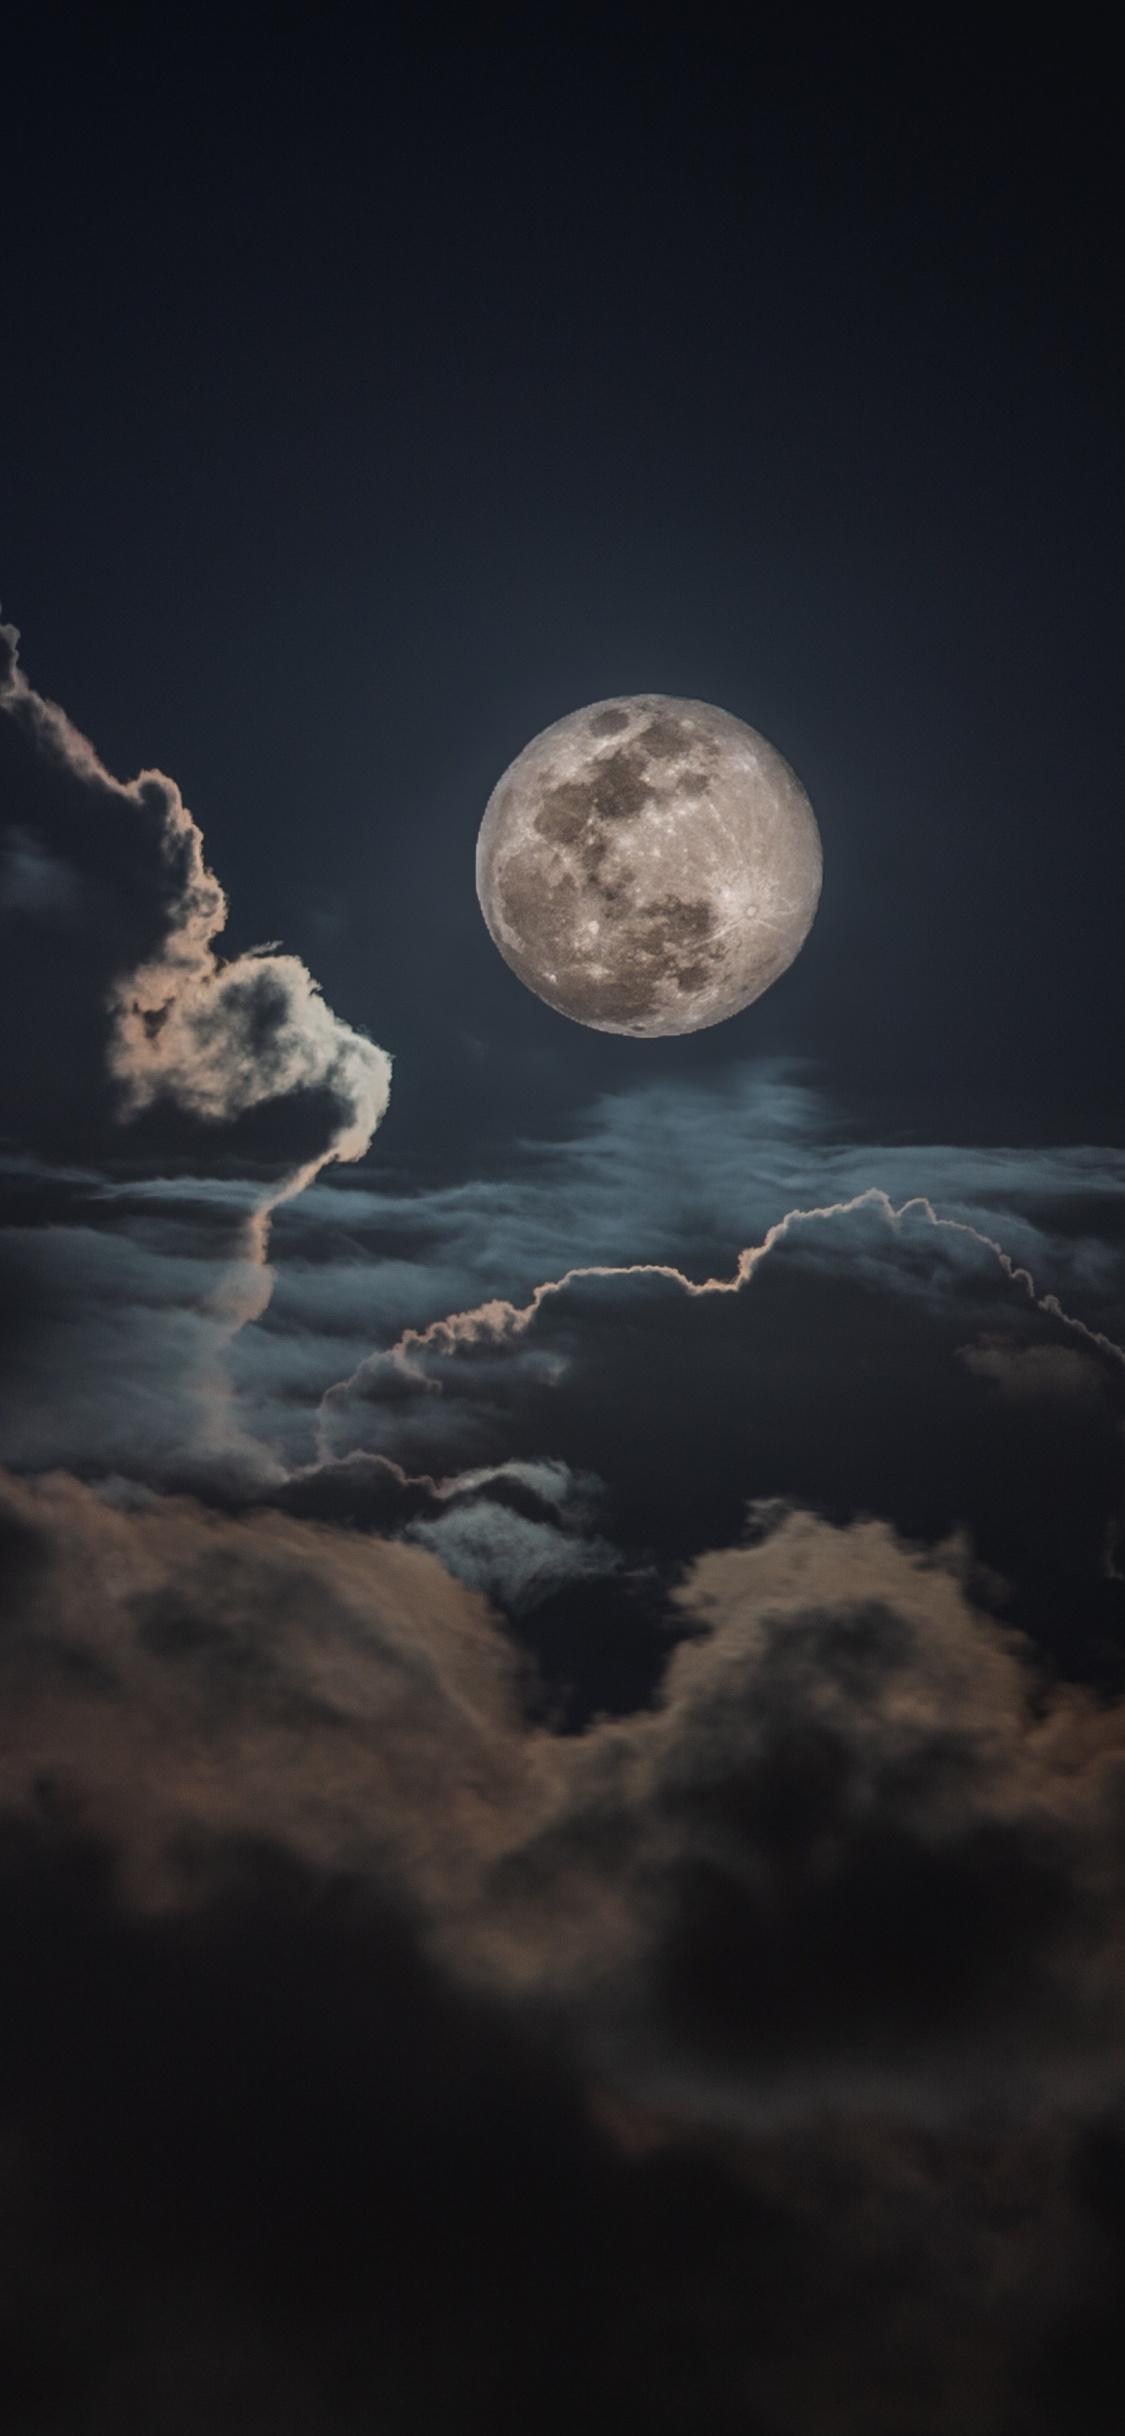 Details more than 65 night sky moon wallpaper best - in.cdgdbentre